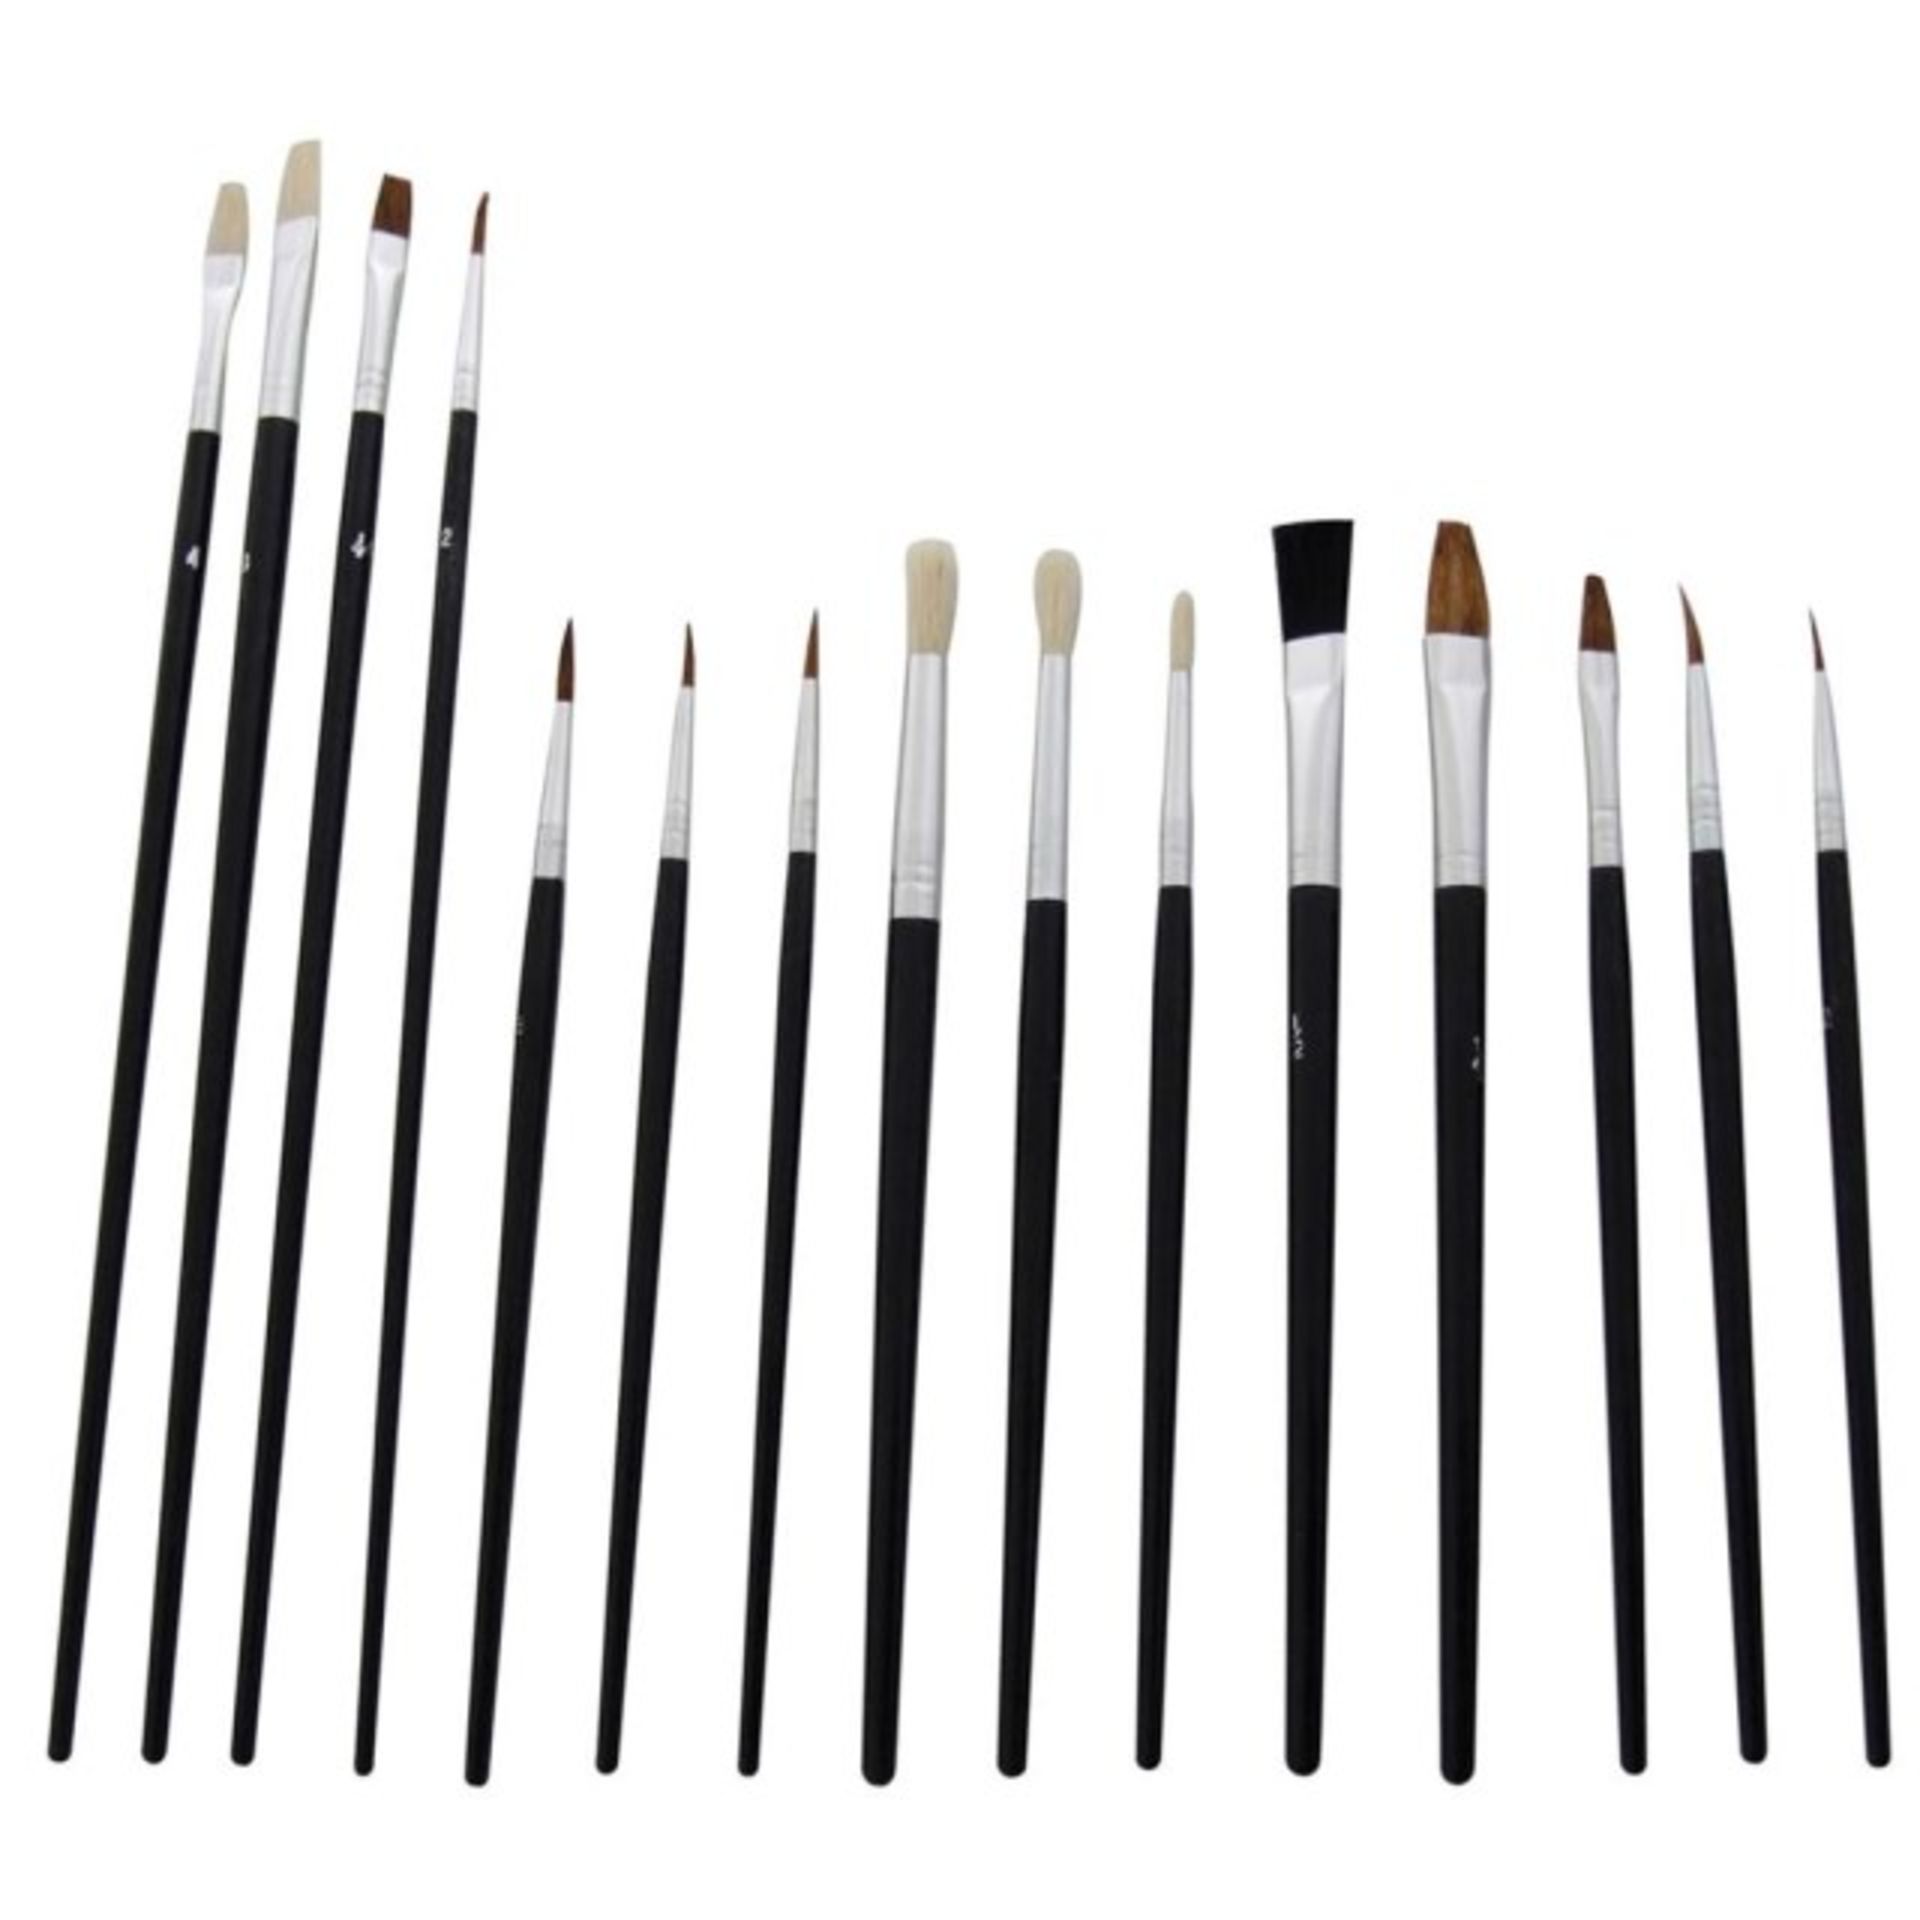 V Brand New 15pc Paint Brush Set Being Suitable For Watercolours And Oils/Model Making Etc